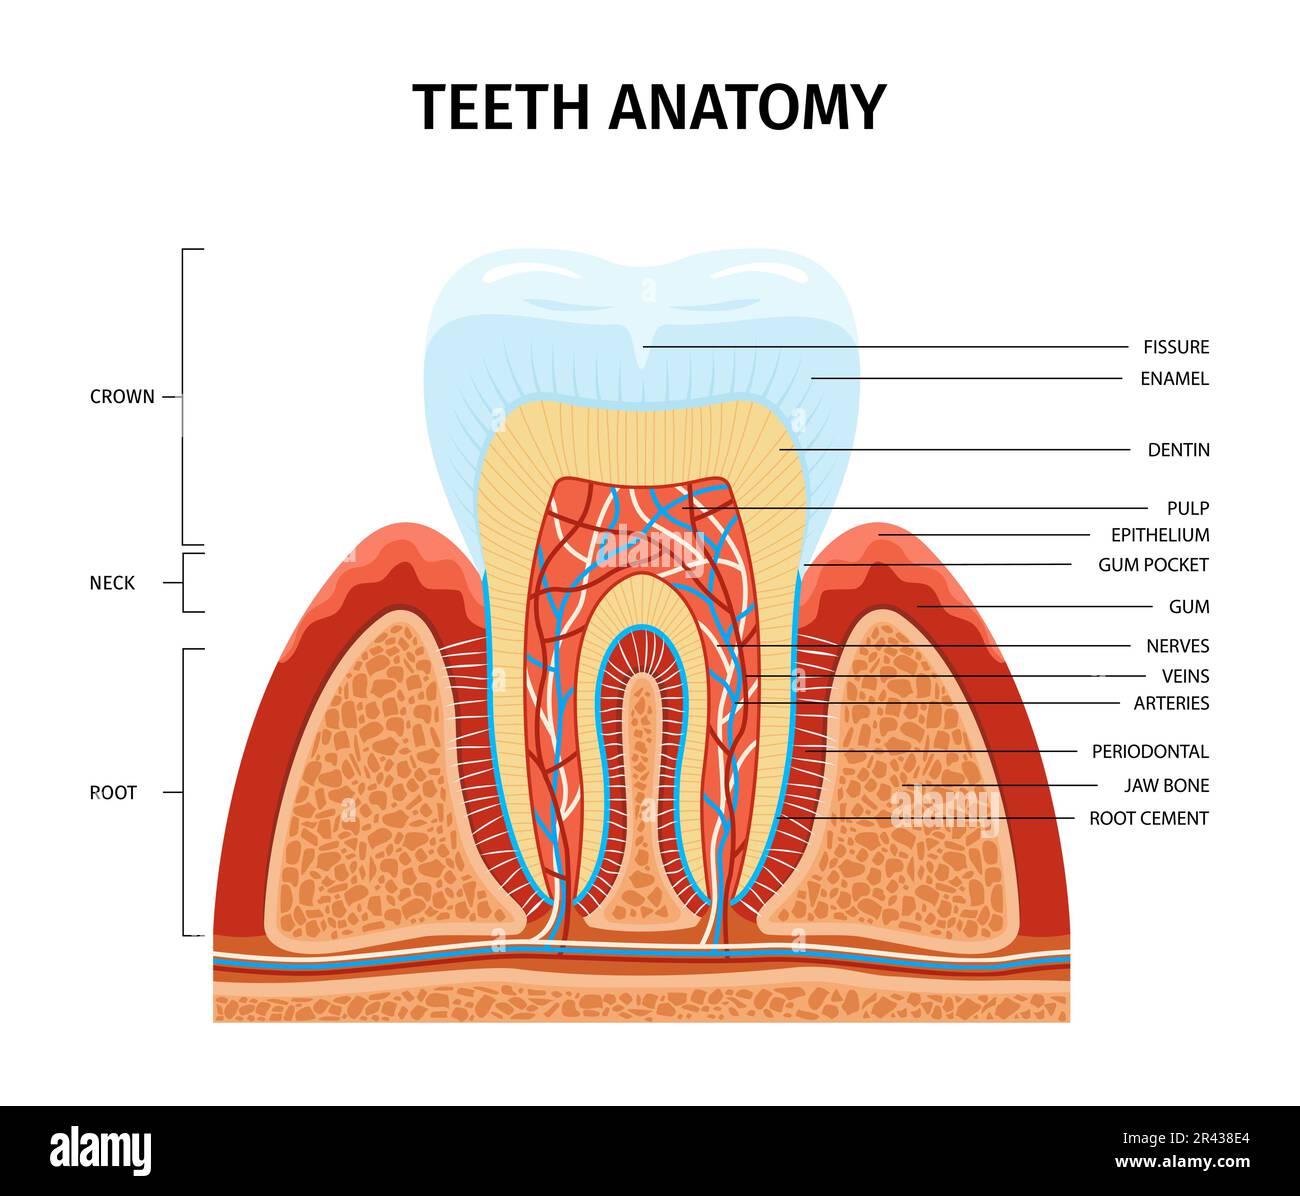 Teeth anatomy infographic composition with view of tooth growing from gum with text captions anatomic parts vector illustration Stock Vector